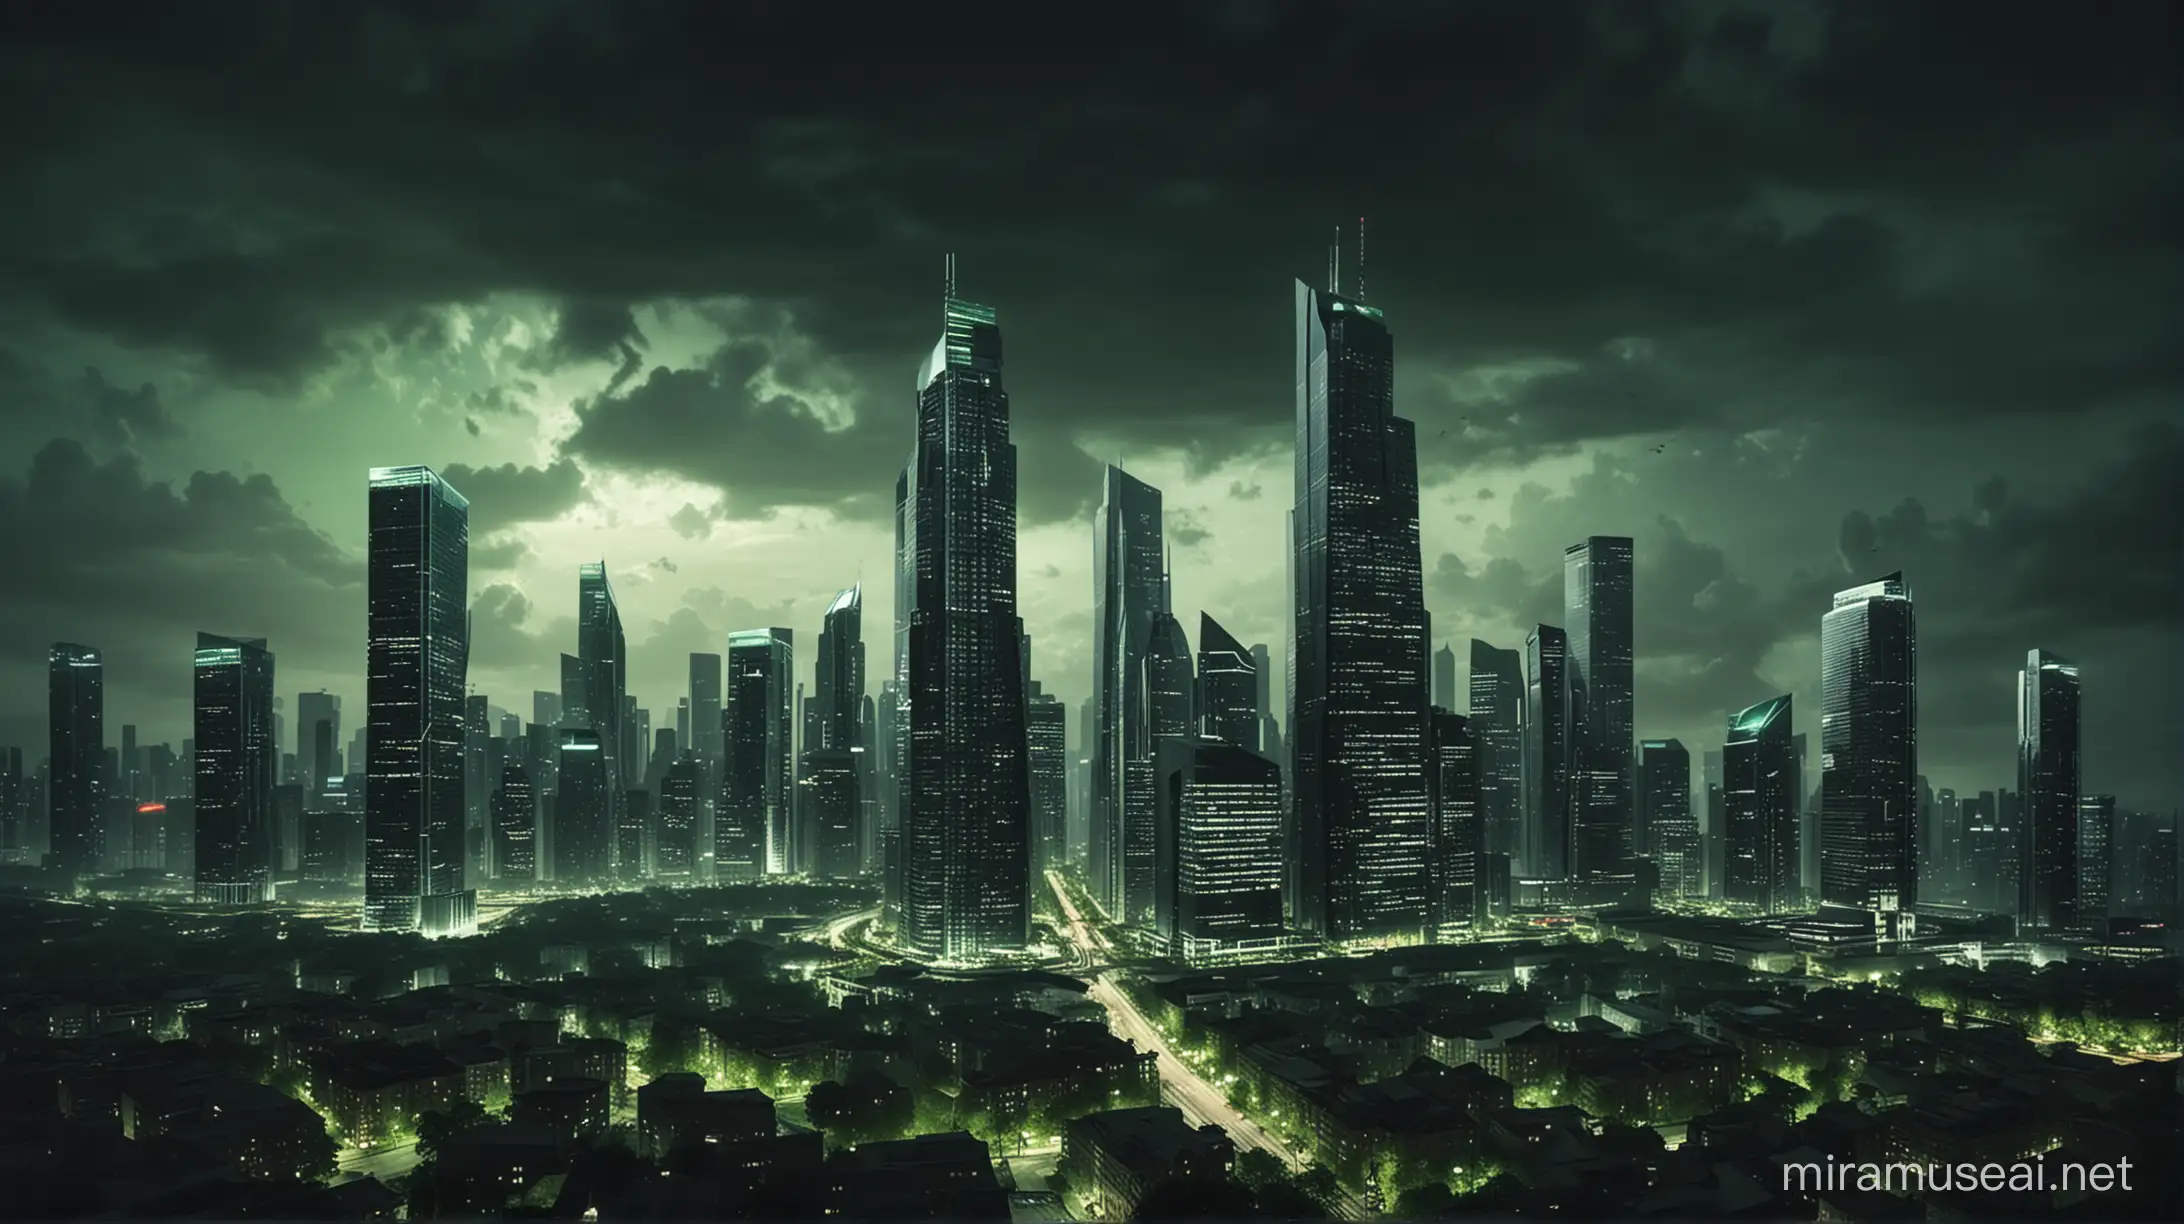 epic landscape, dark background, powerful green for buildings, glorious tall buildings, awe inspiring